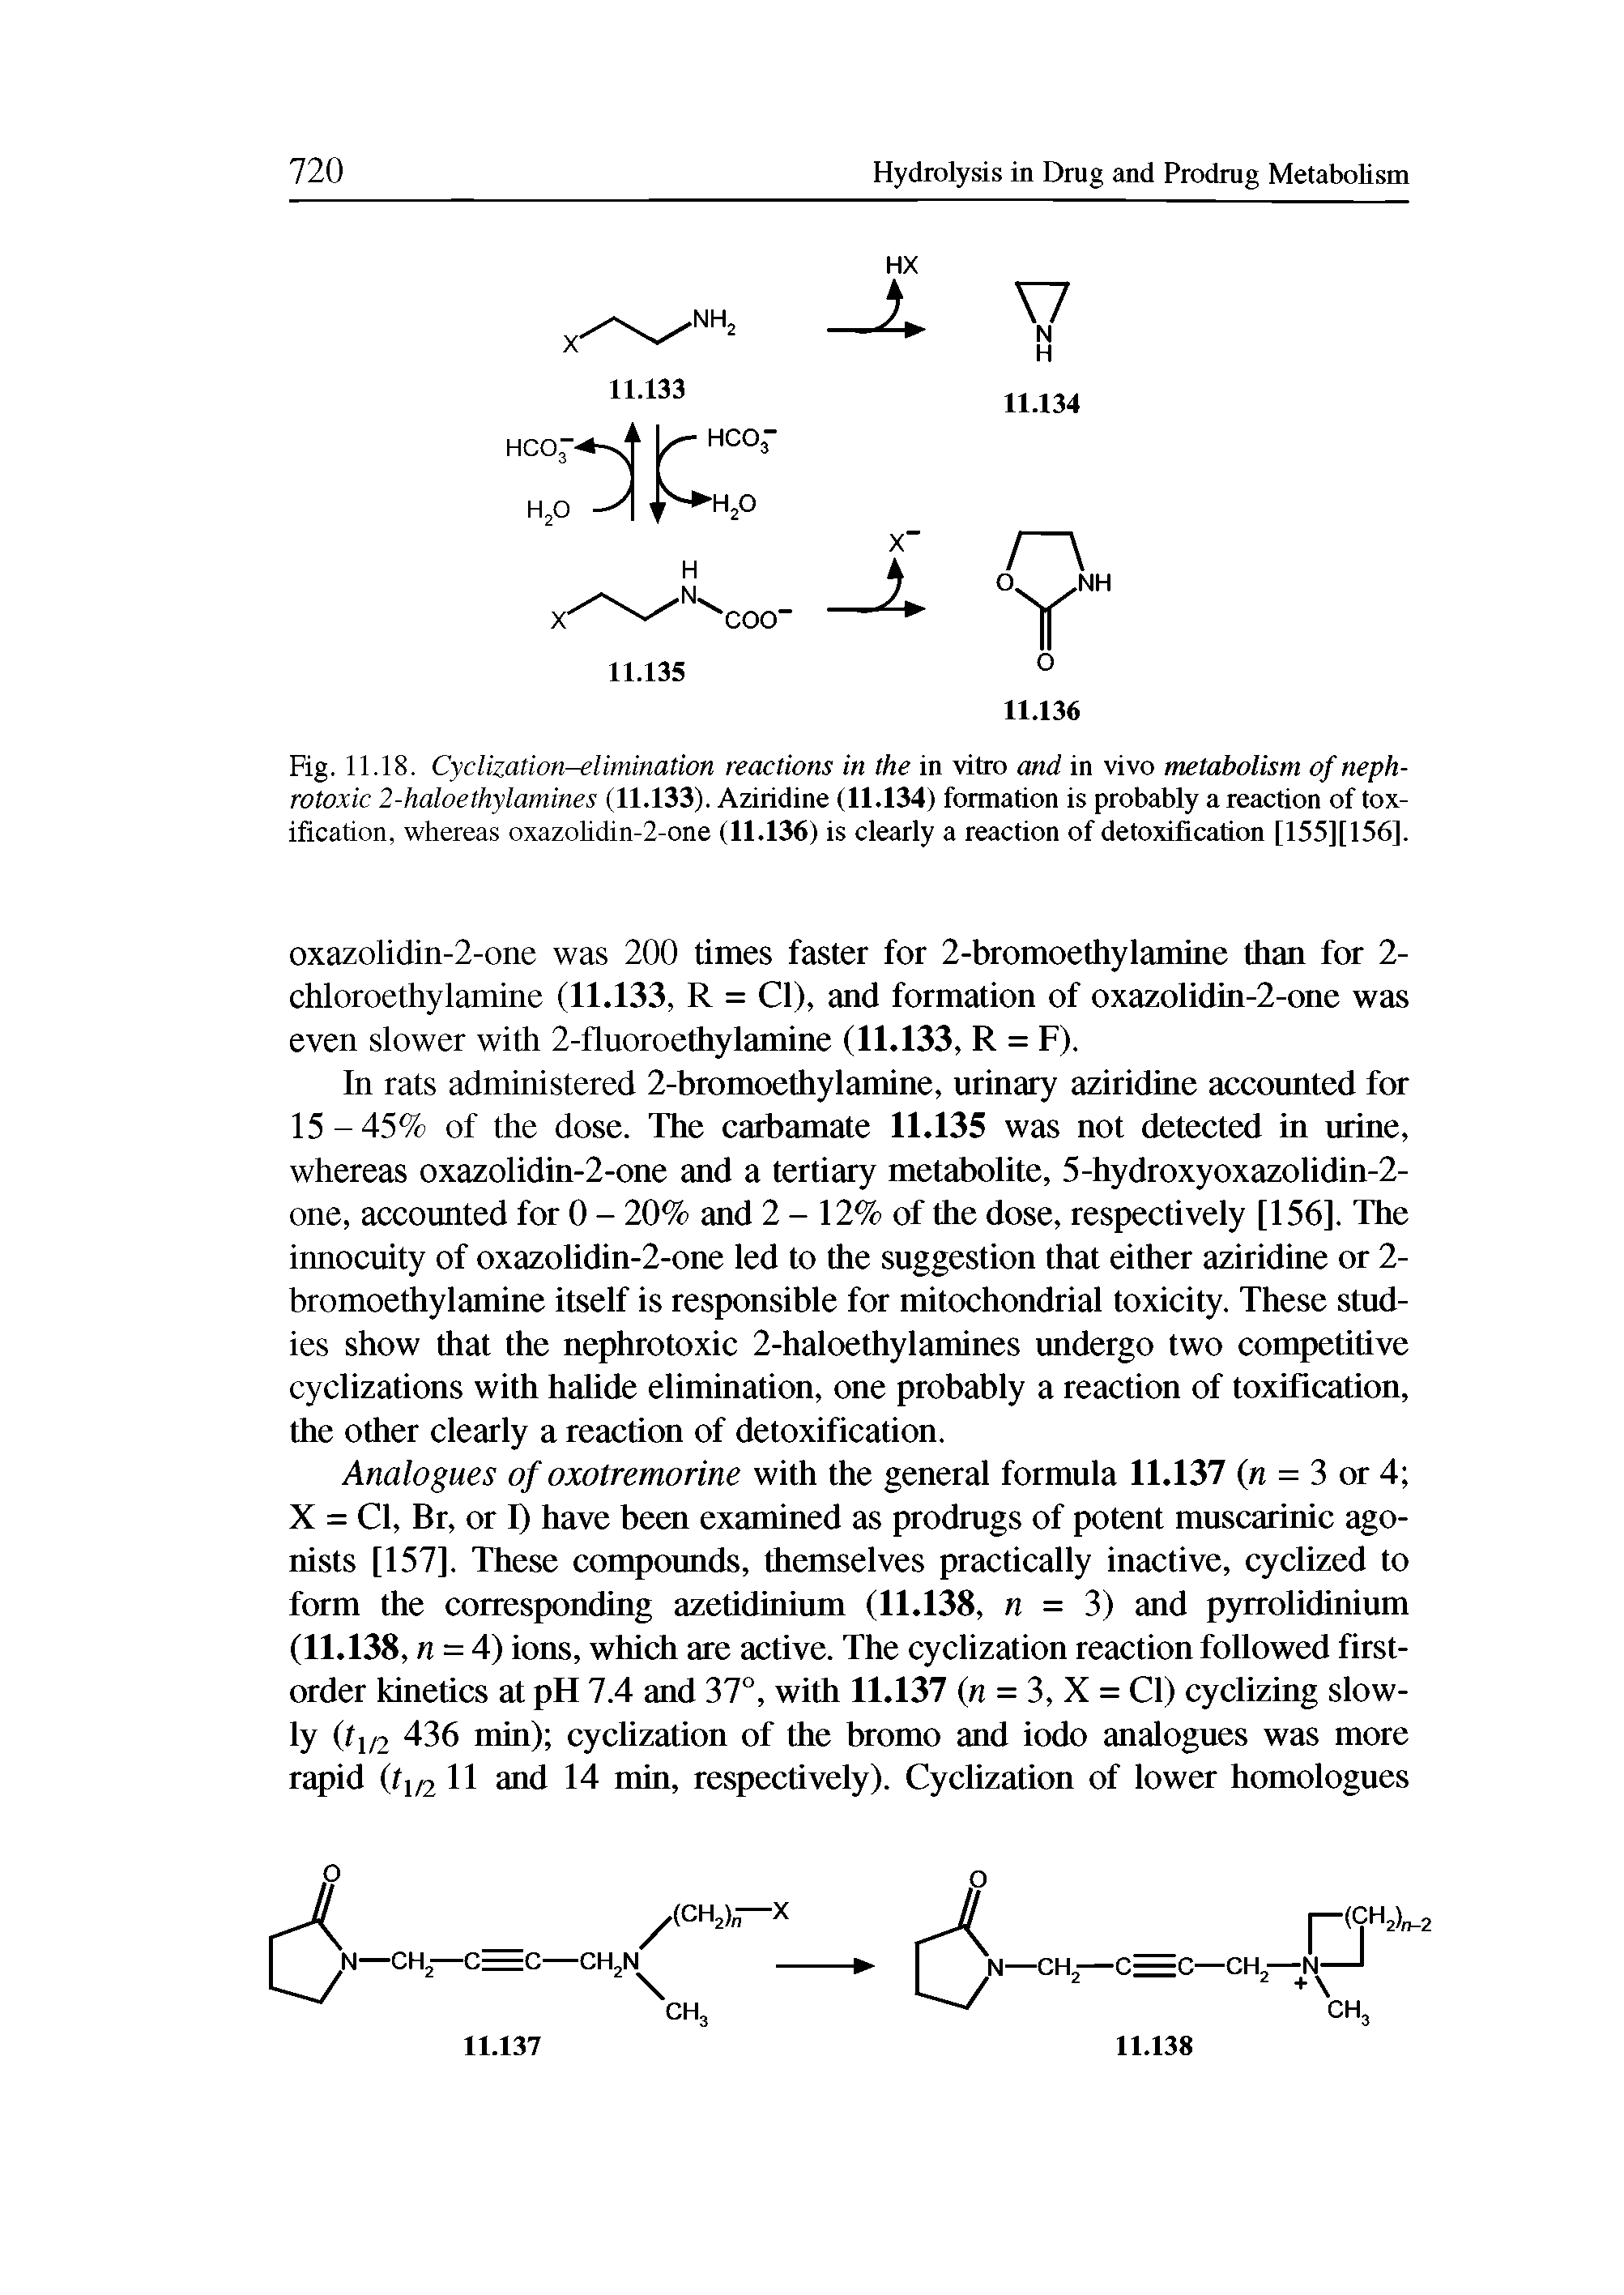 Fig. 11.18. Cyclization-elimination reactions in the in vitro and in vivo metabolism of nephrotoxic 2-haloethylamines (11.133). Aziridine (11.134) formation is probably a reaction of tox-ification, whereas oxazolidin-2-one (11.136) is clearly a reaction of detoxification [155][156].